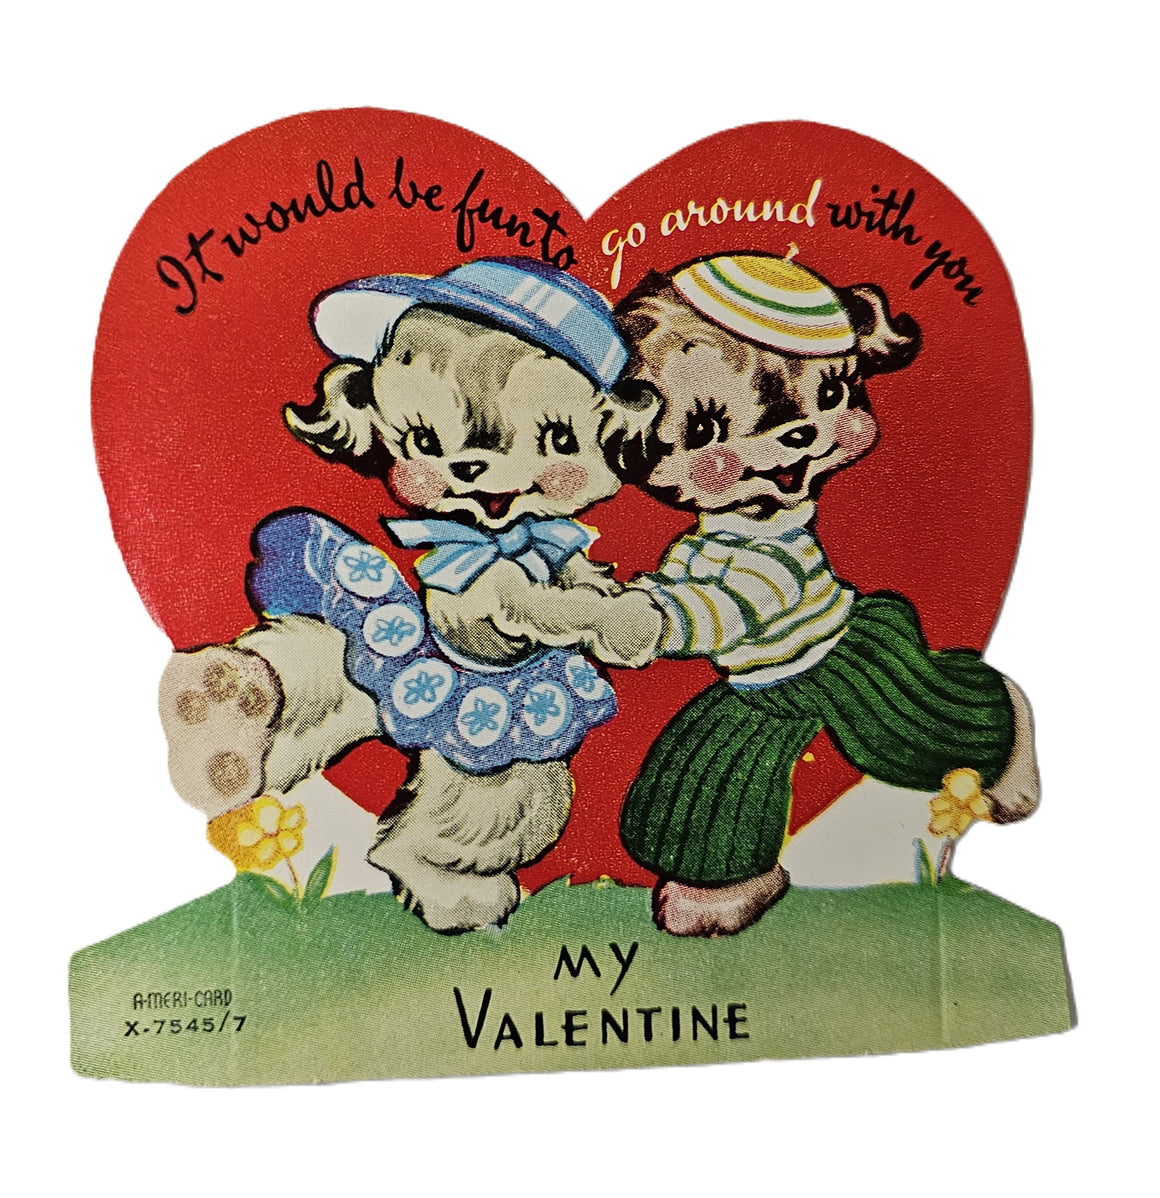 Vintage 1950s Valentine Card Dancing Dogs "It Would Be Fun To Go Around You"